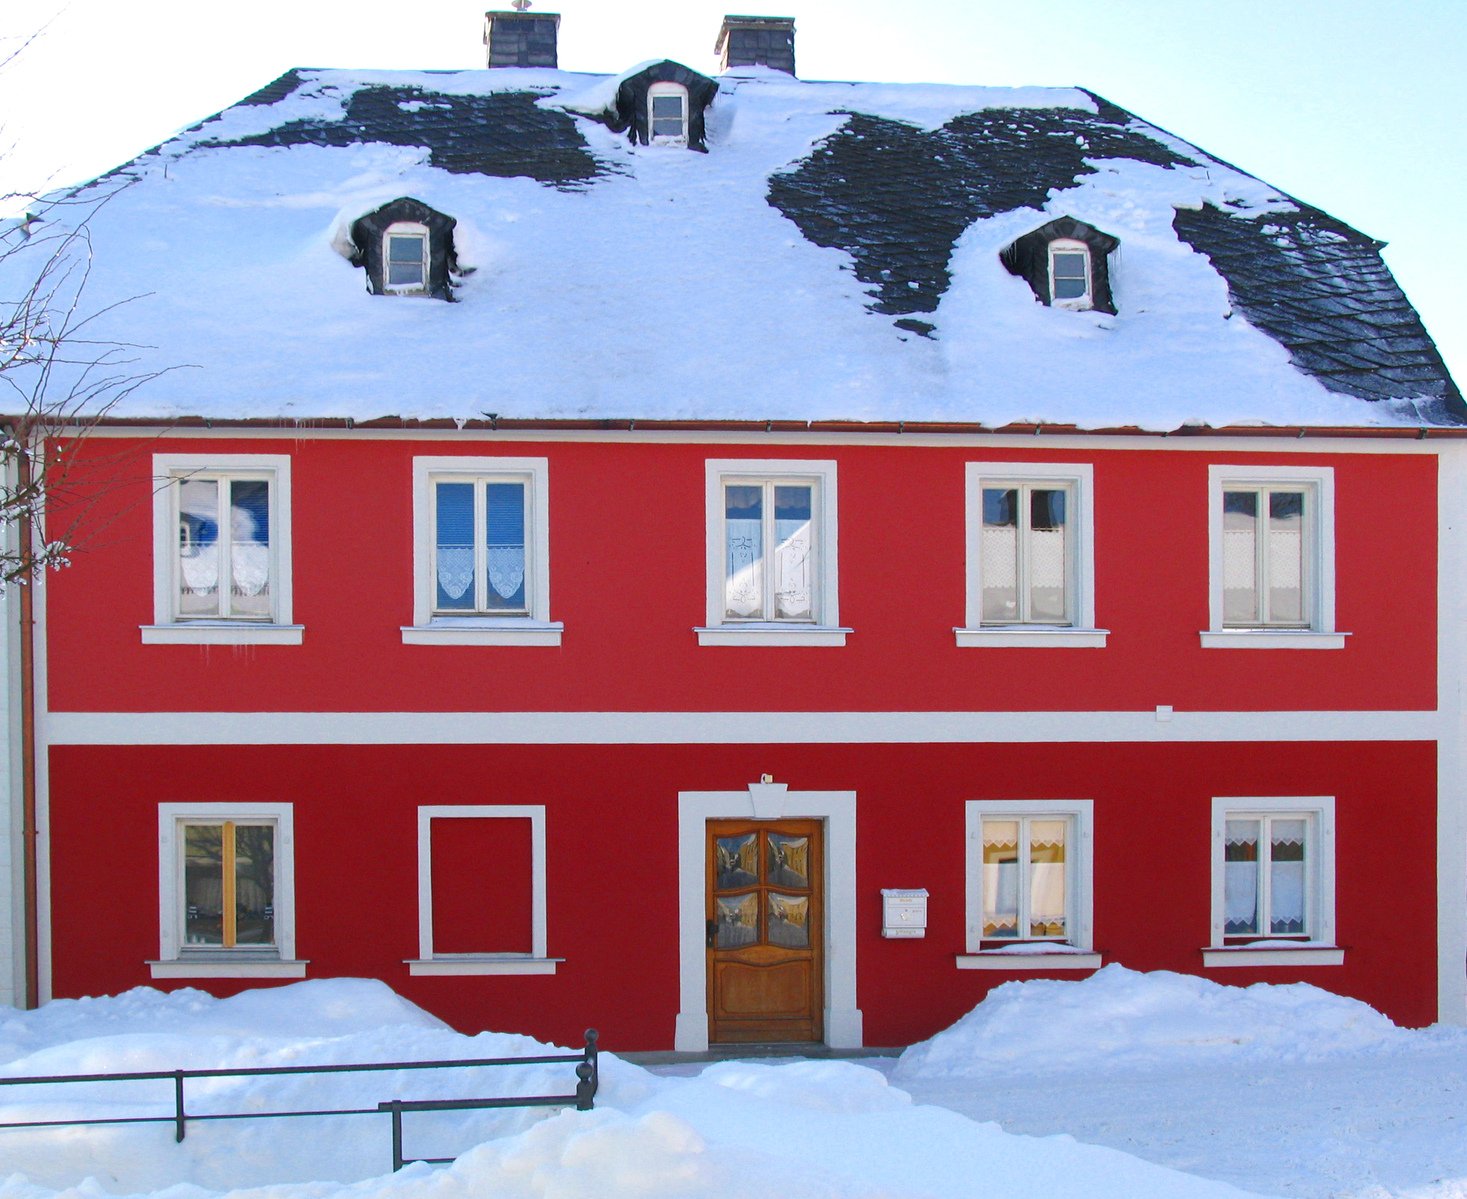 red and white house with snow on the ground